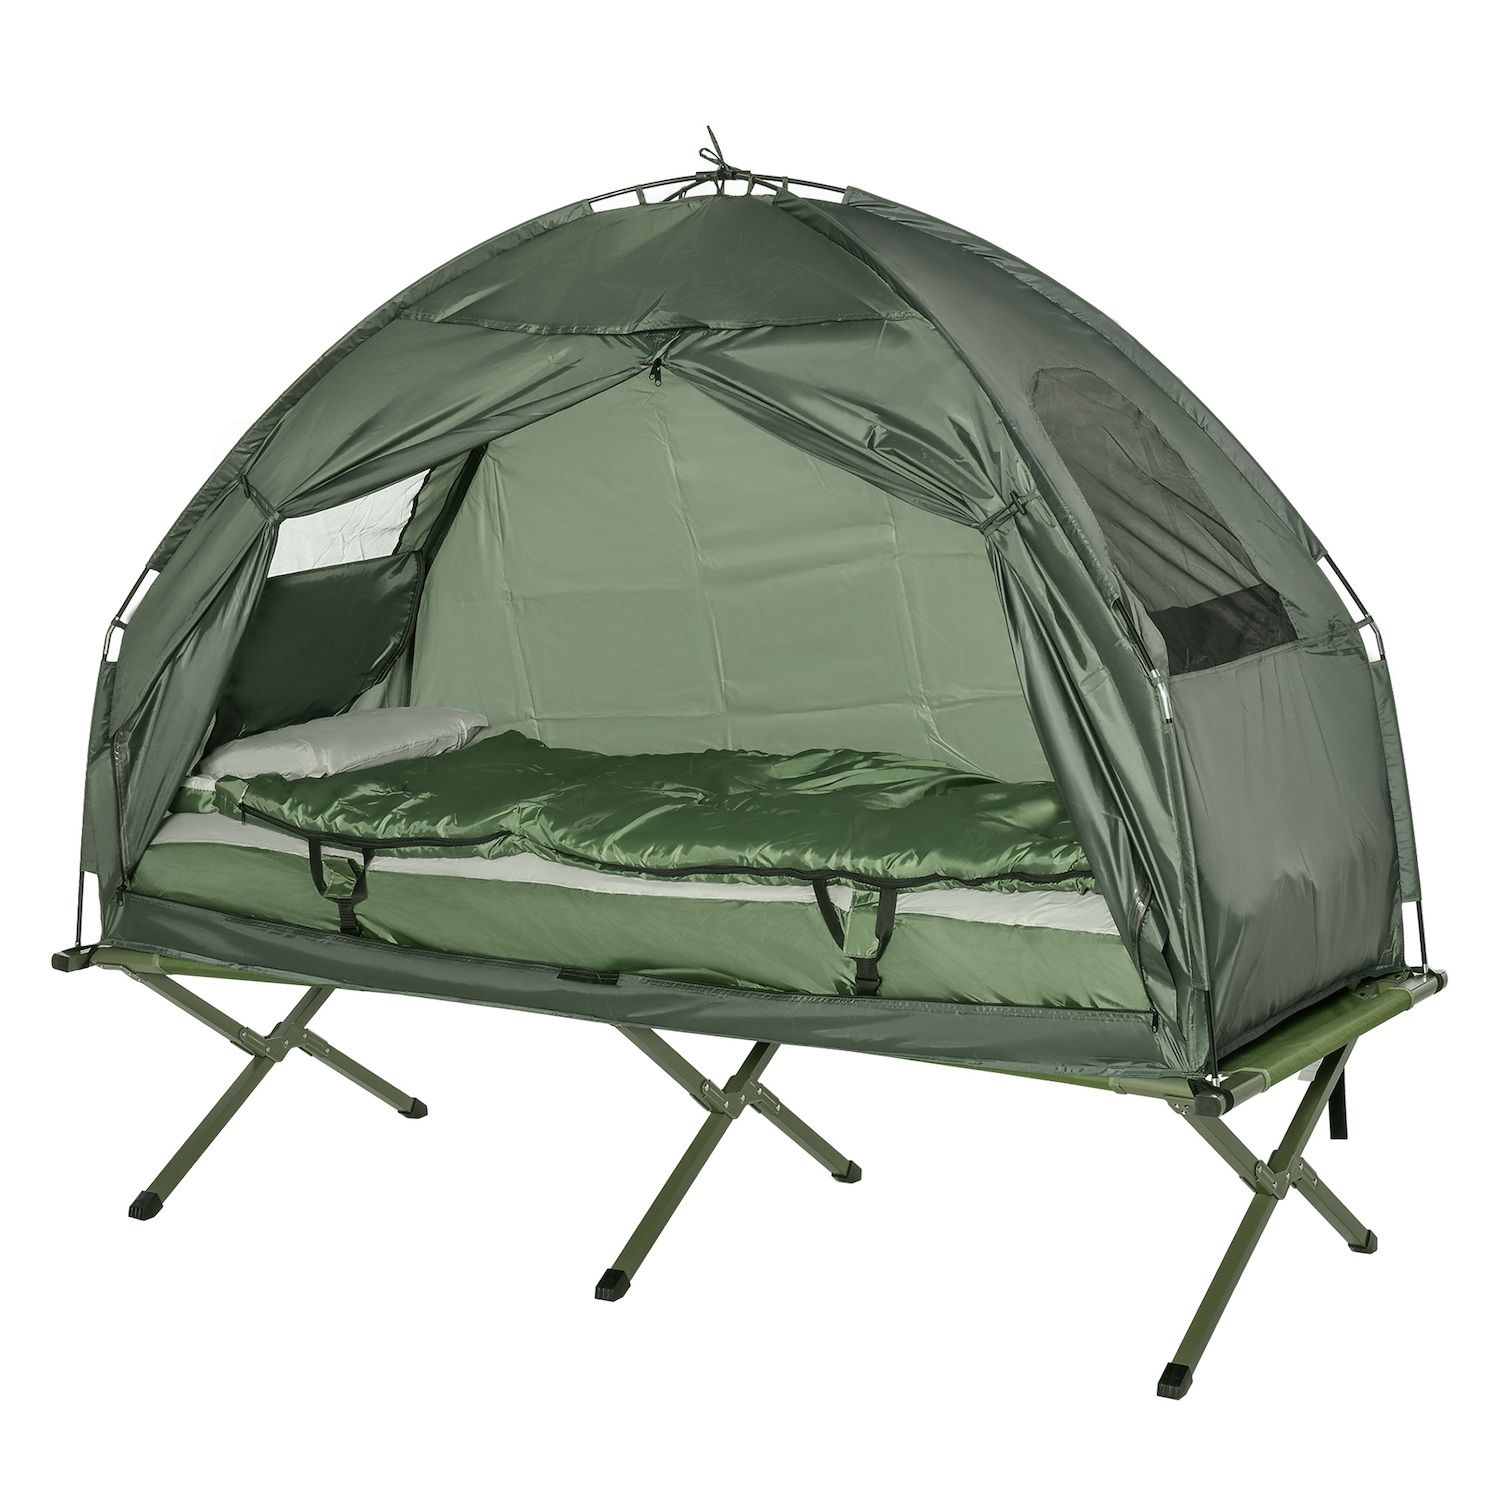  HearthSong Cabin Dreams Bed Tent with Interior Battery